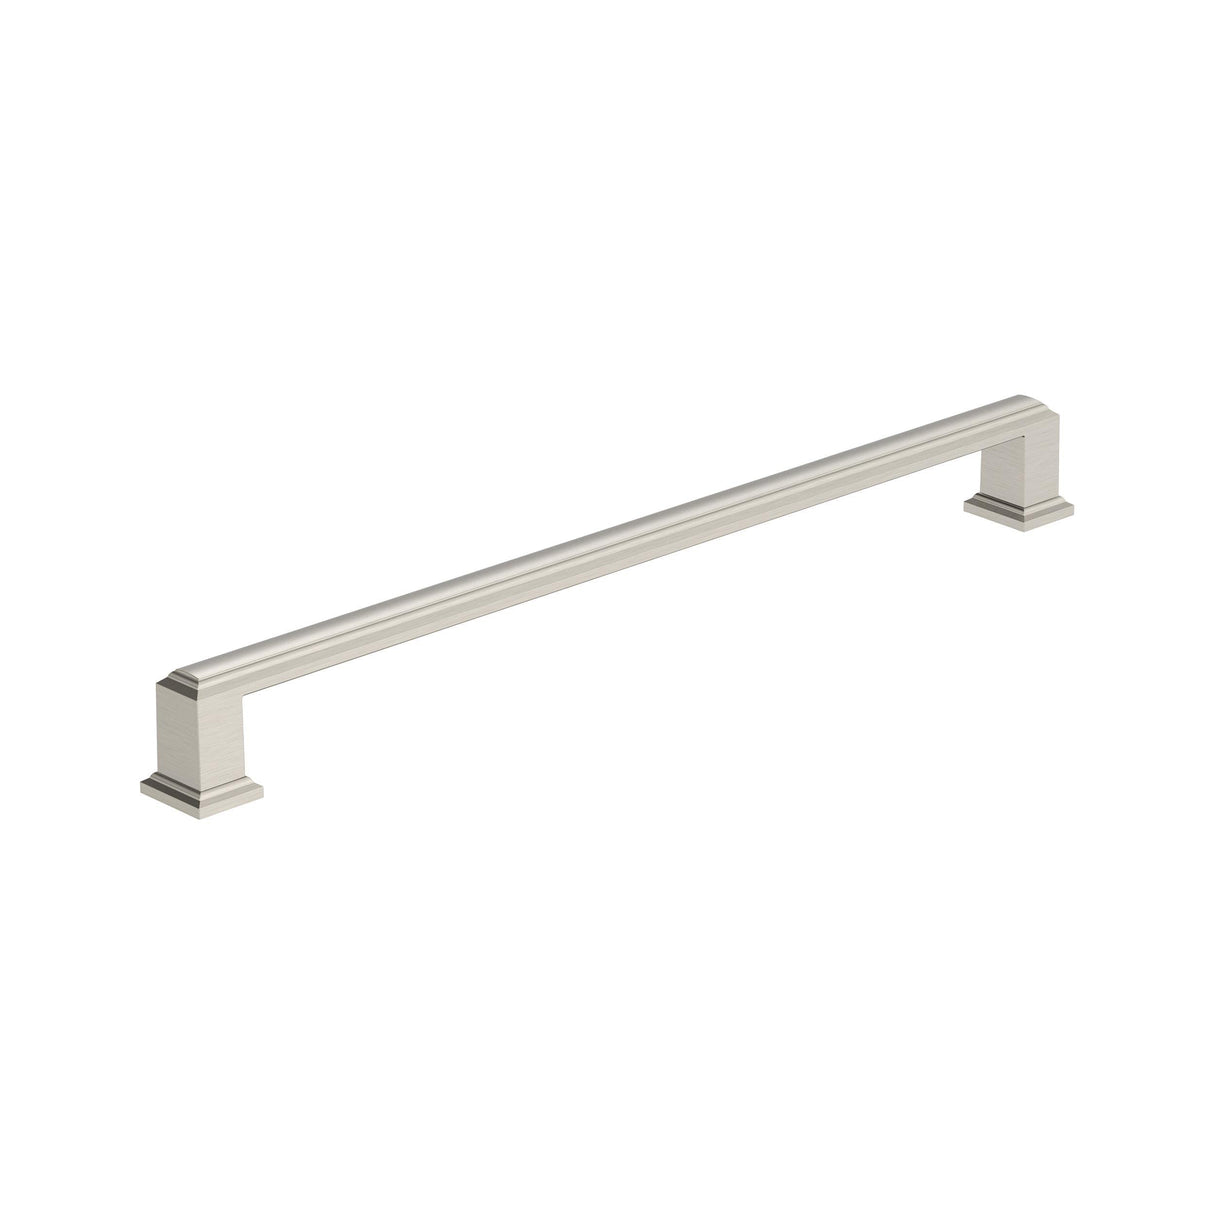 Amerock BP37361G10 Satin Nickel Cabinet Pull 10-1/16 in (256 mm) Center-to-Center Cabinet Handle Appoint Drawer Pull Kitchen Cabinet Handle Furniture Hardware